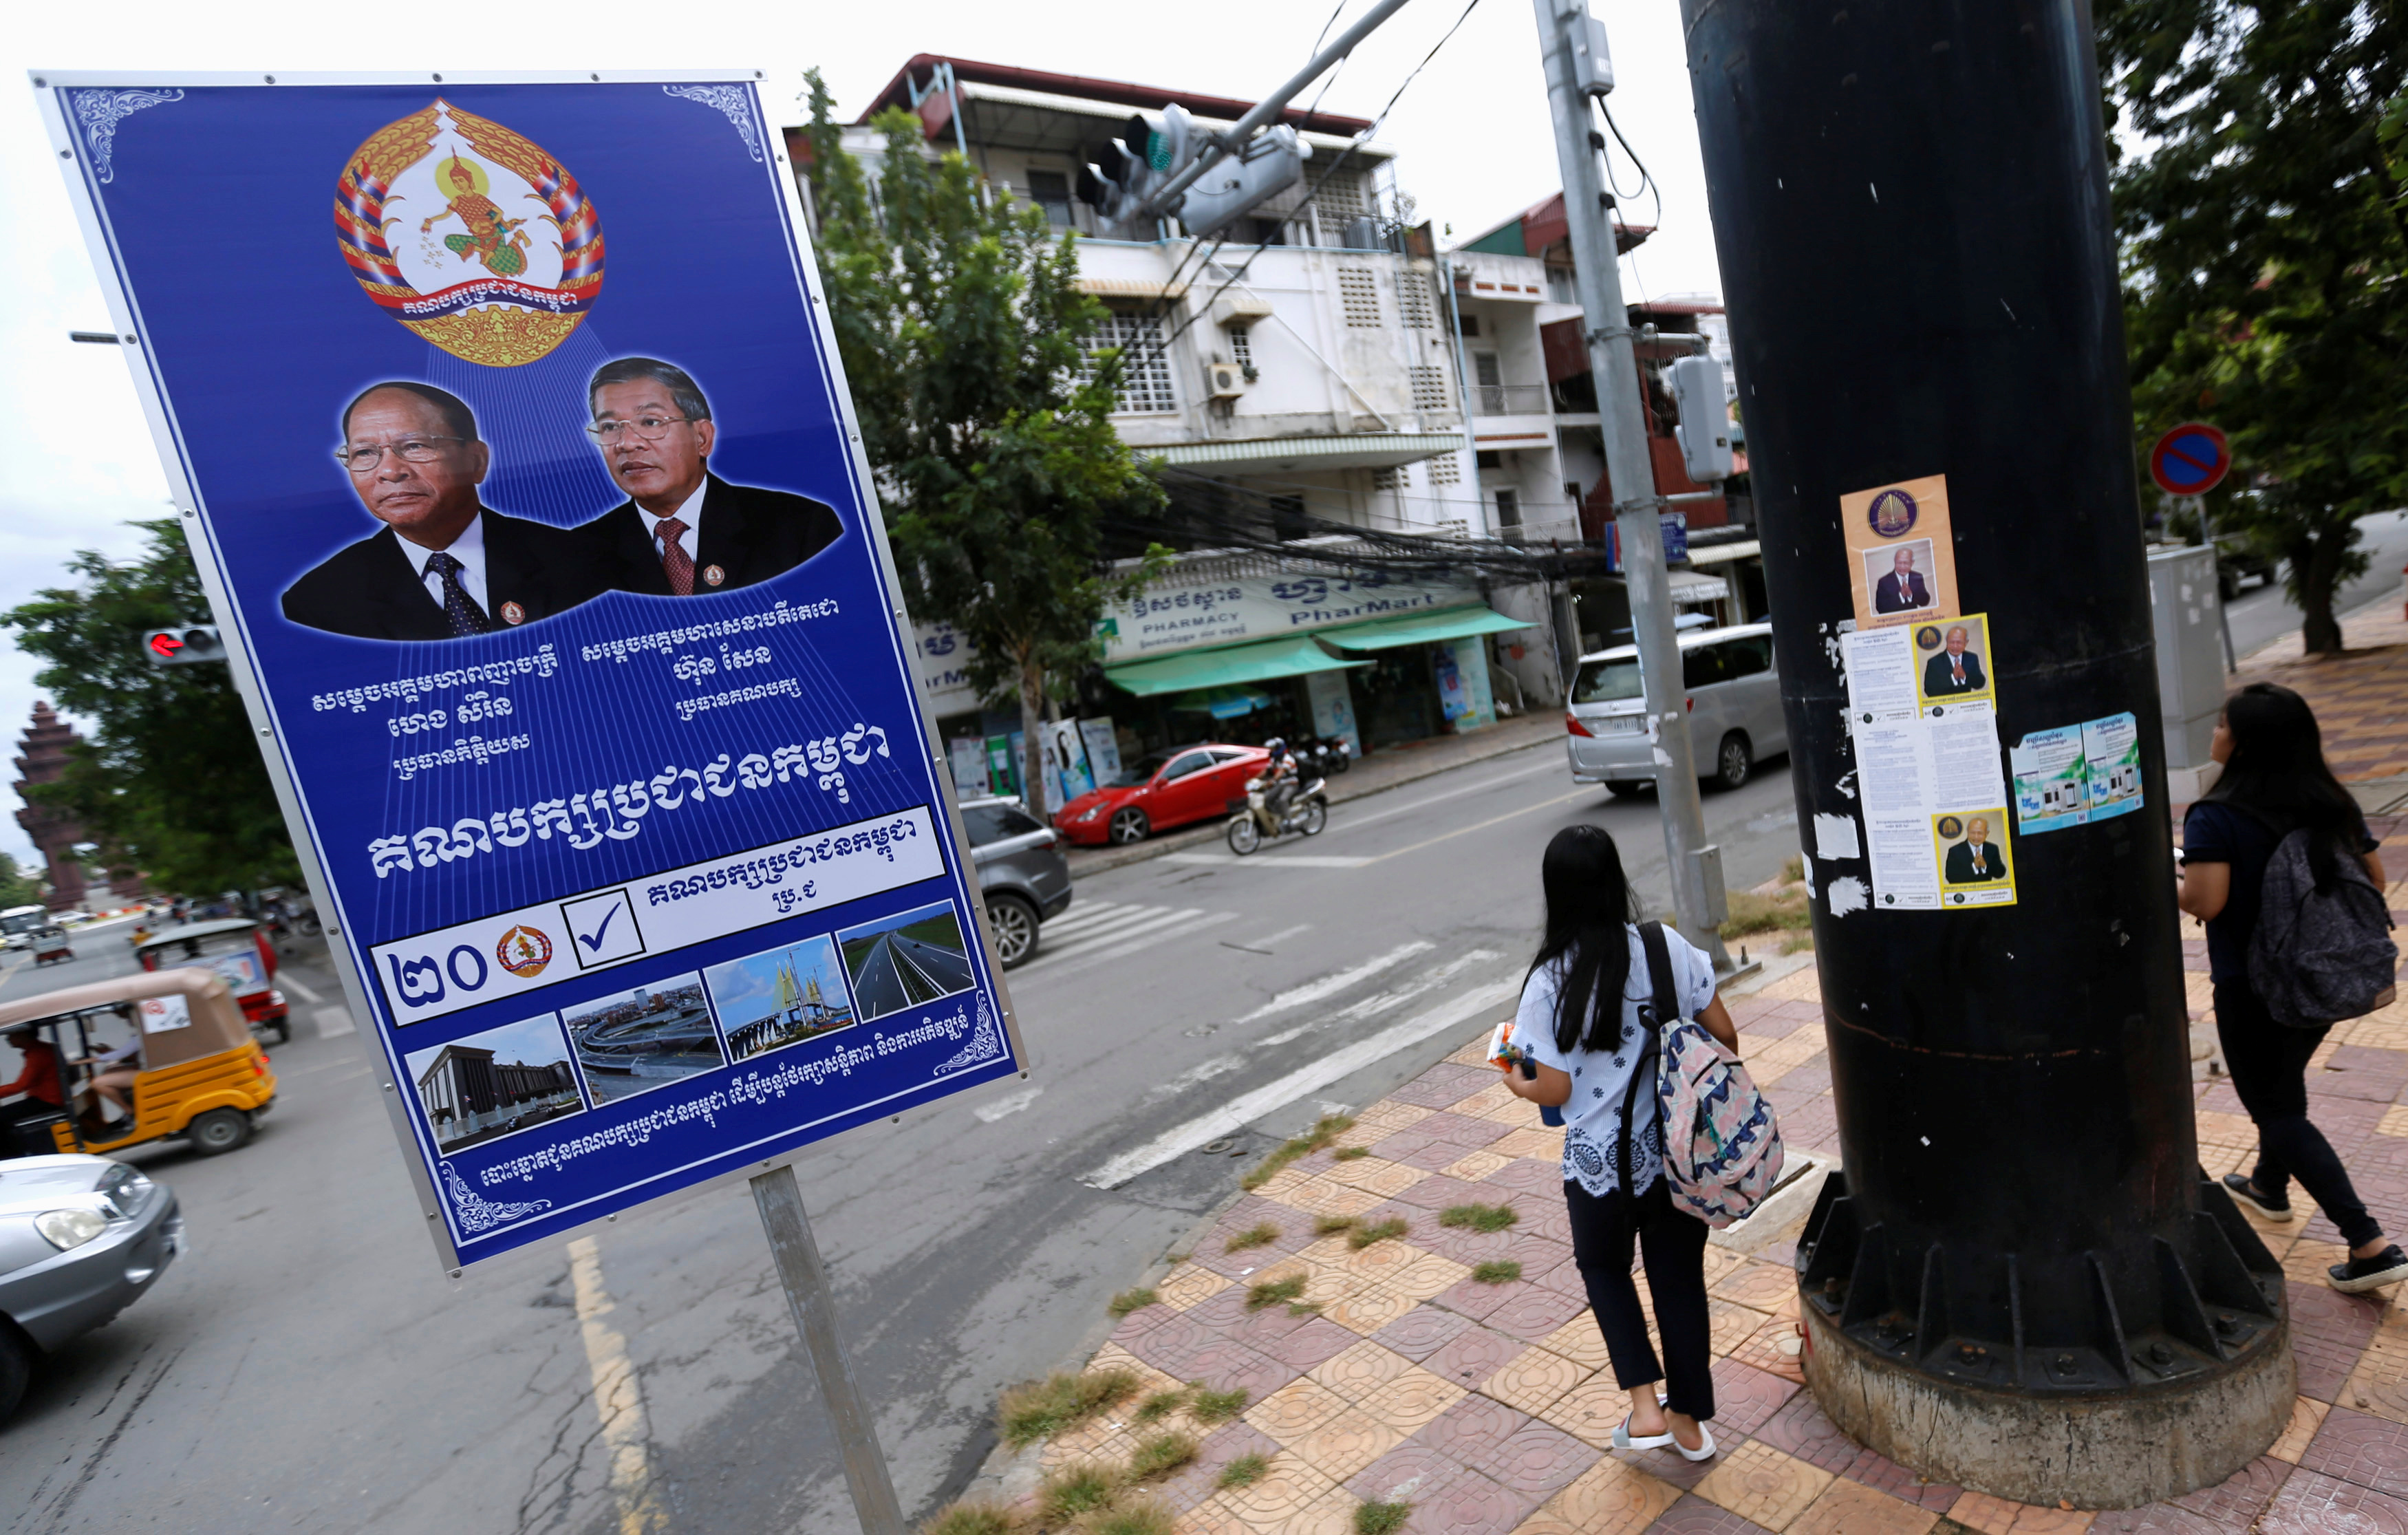 Posters of the Cambodian People's Party (CPP) and FUNCINPEC Party are seen along a street in Phnom Penh